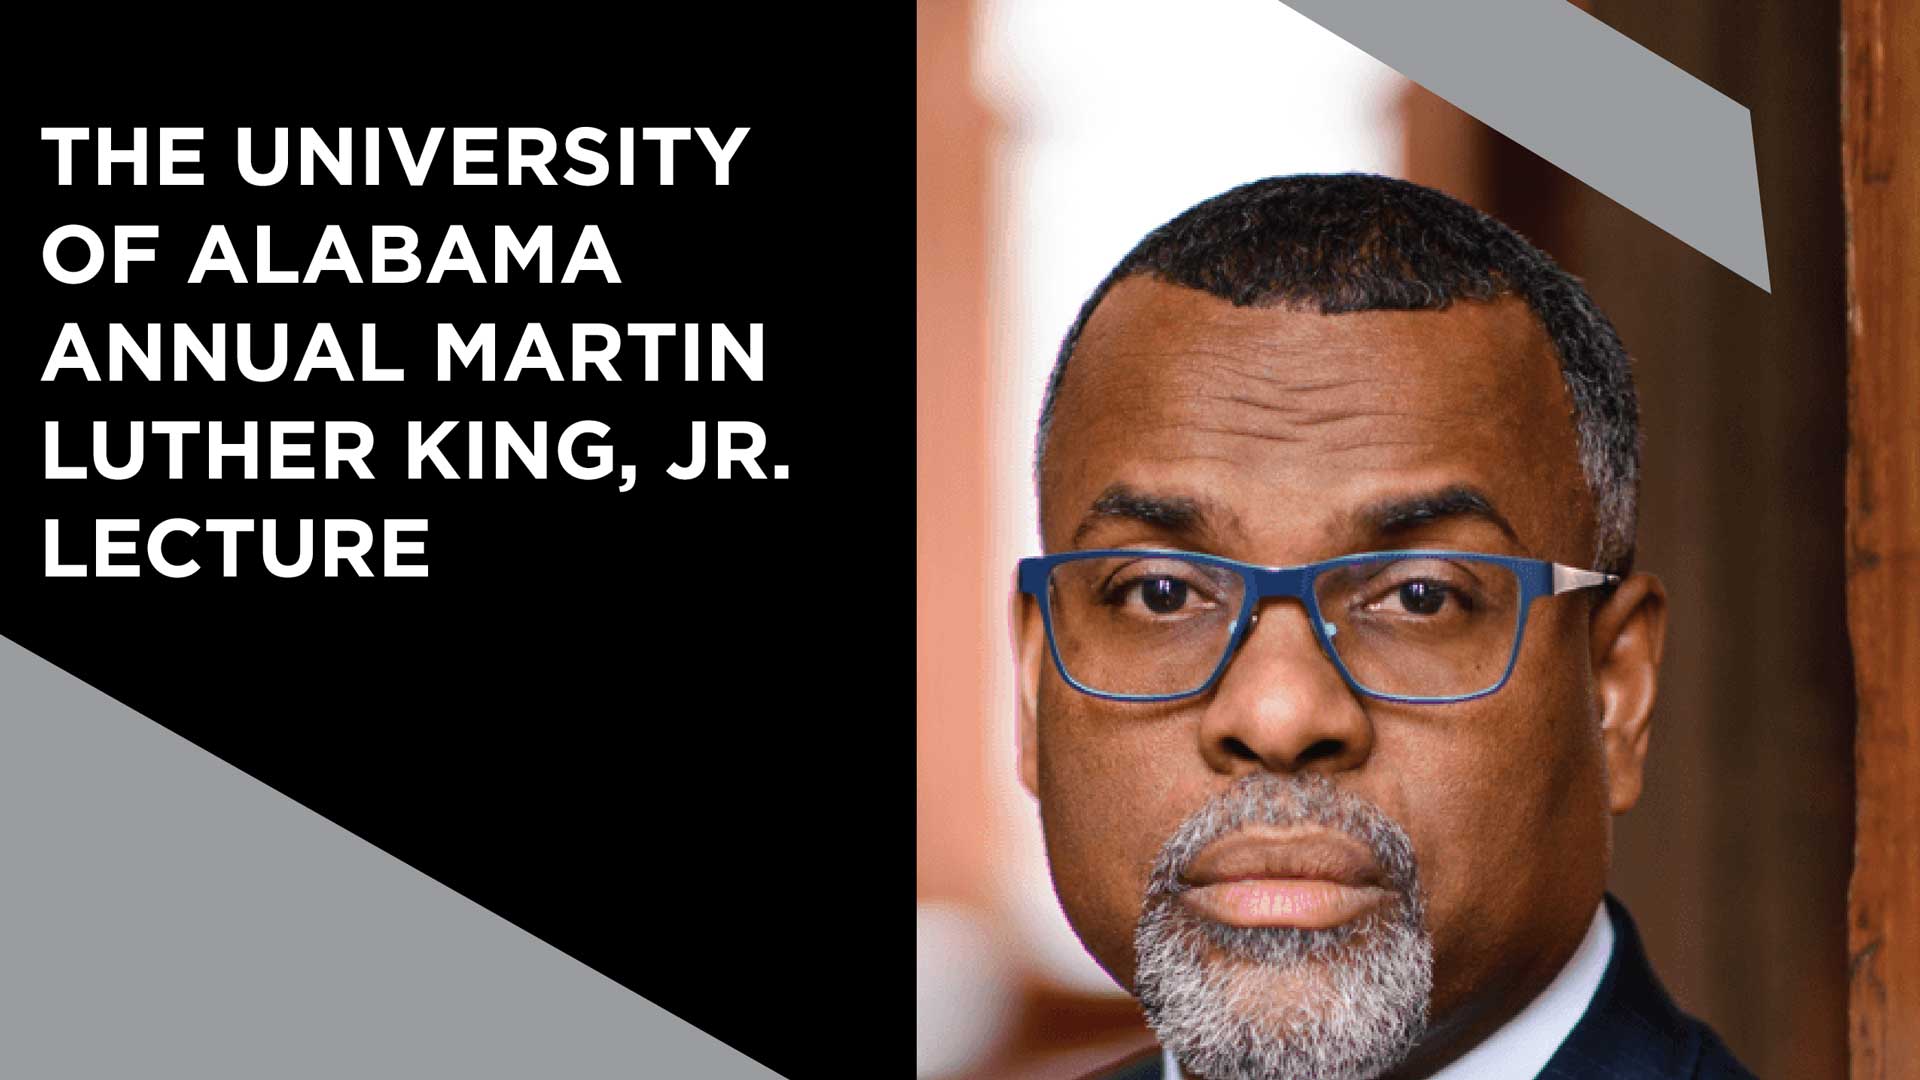 The university of alabama annual martin luther king jr. lecture with headshot of Dr. Eddie Glaude Jr.